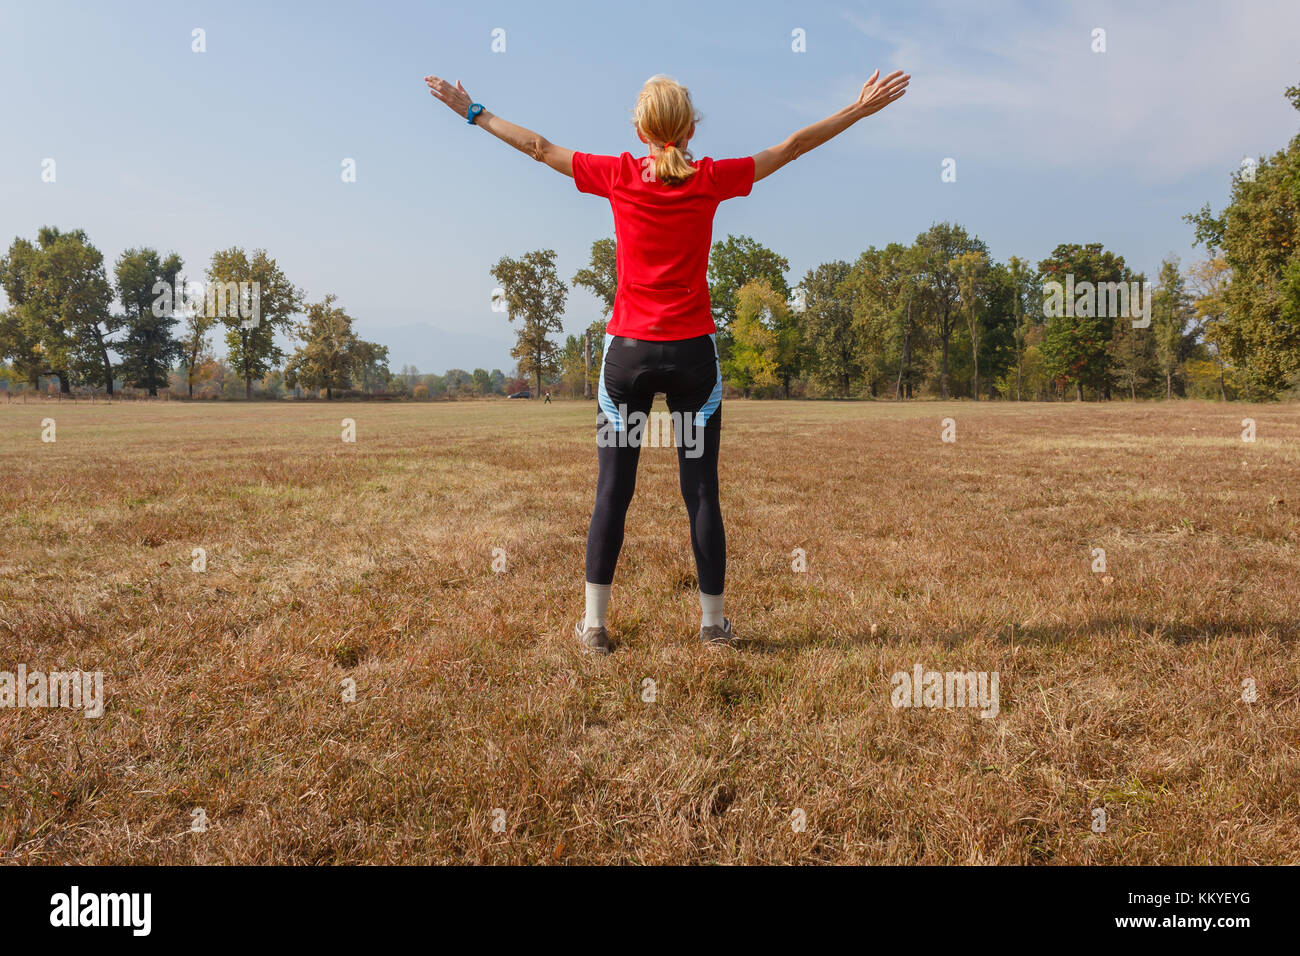 a woman is doing gymnastics in a park /a healthy lifestyle of a fifty-years-old woman practicing gymnastics in a park Stock Photo